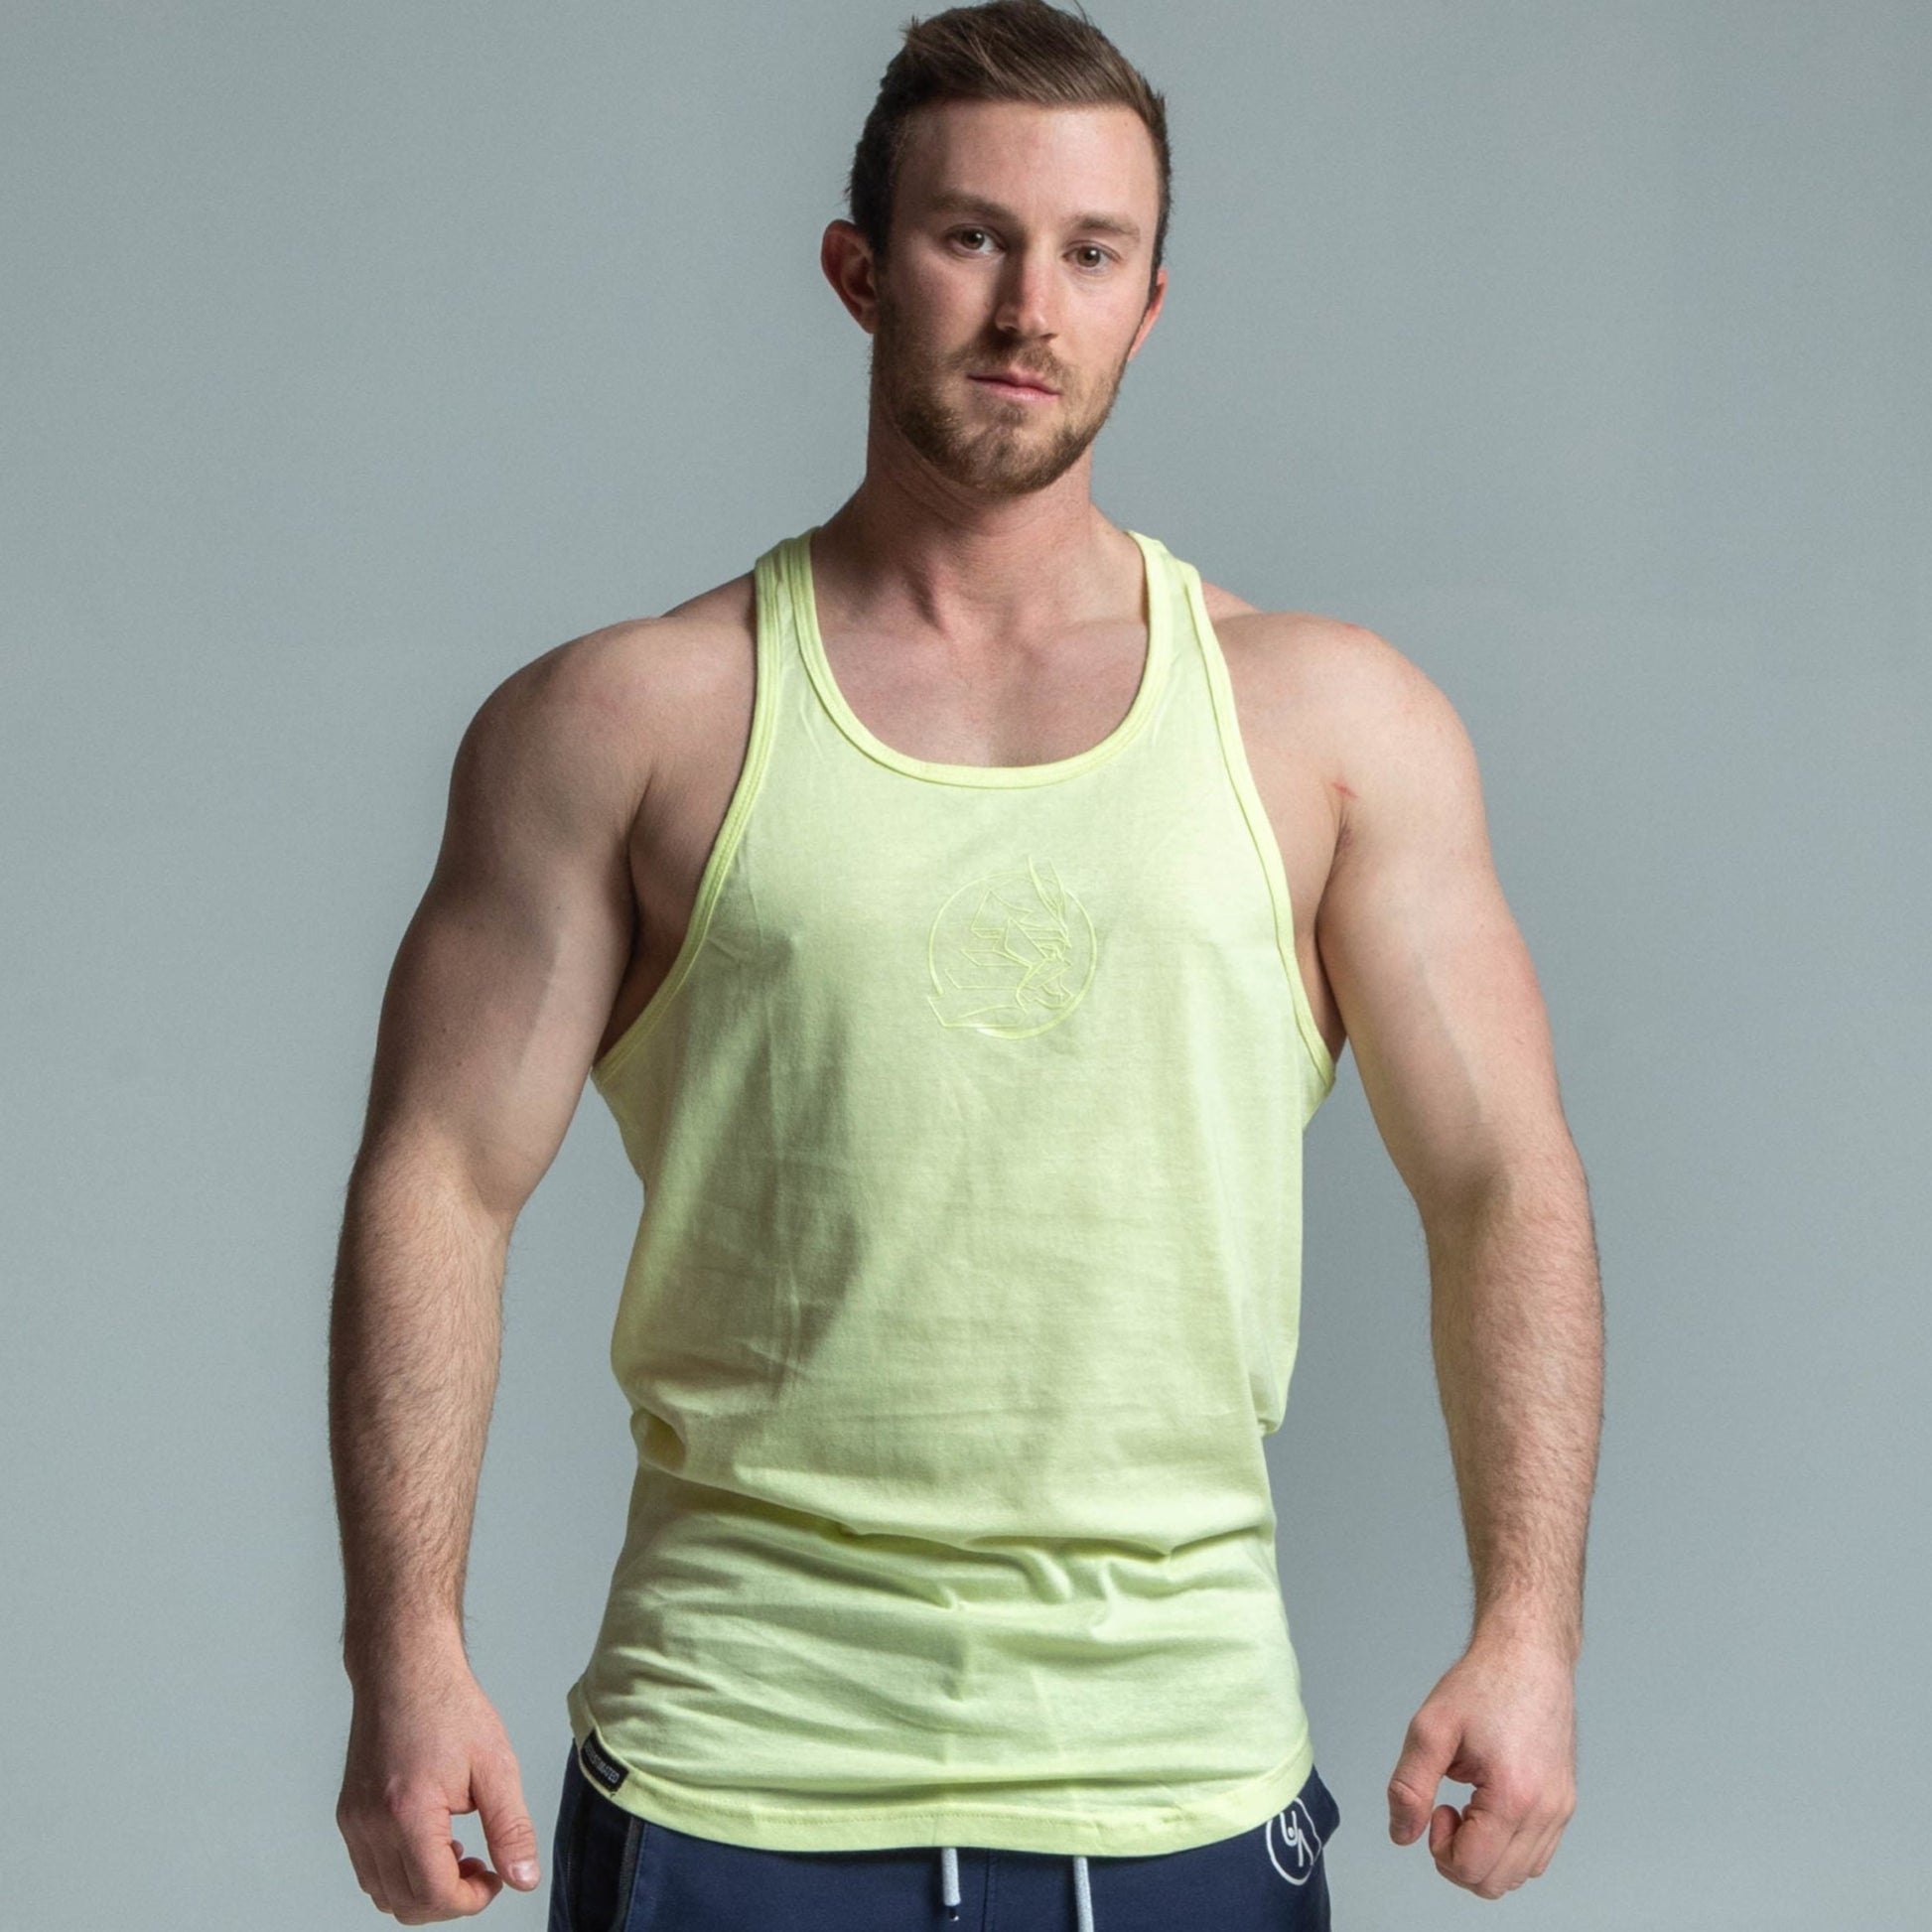 Front view of muscular man wearing yellow glow stringer